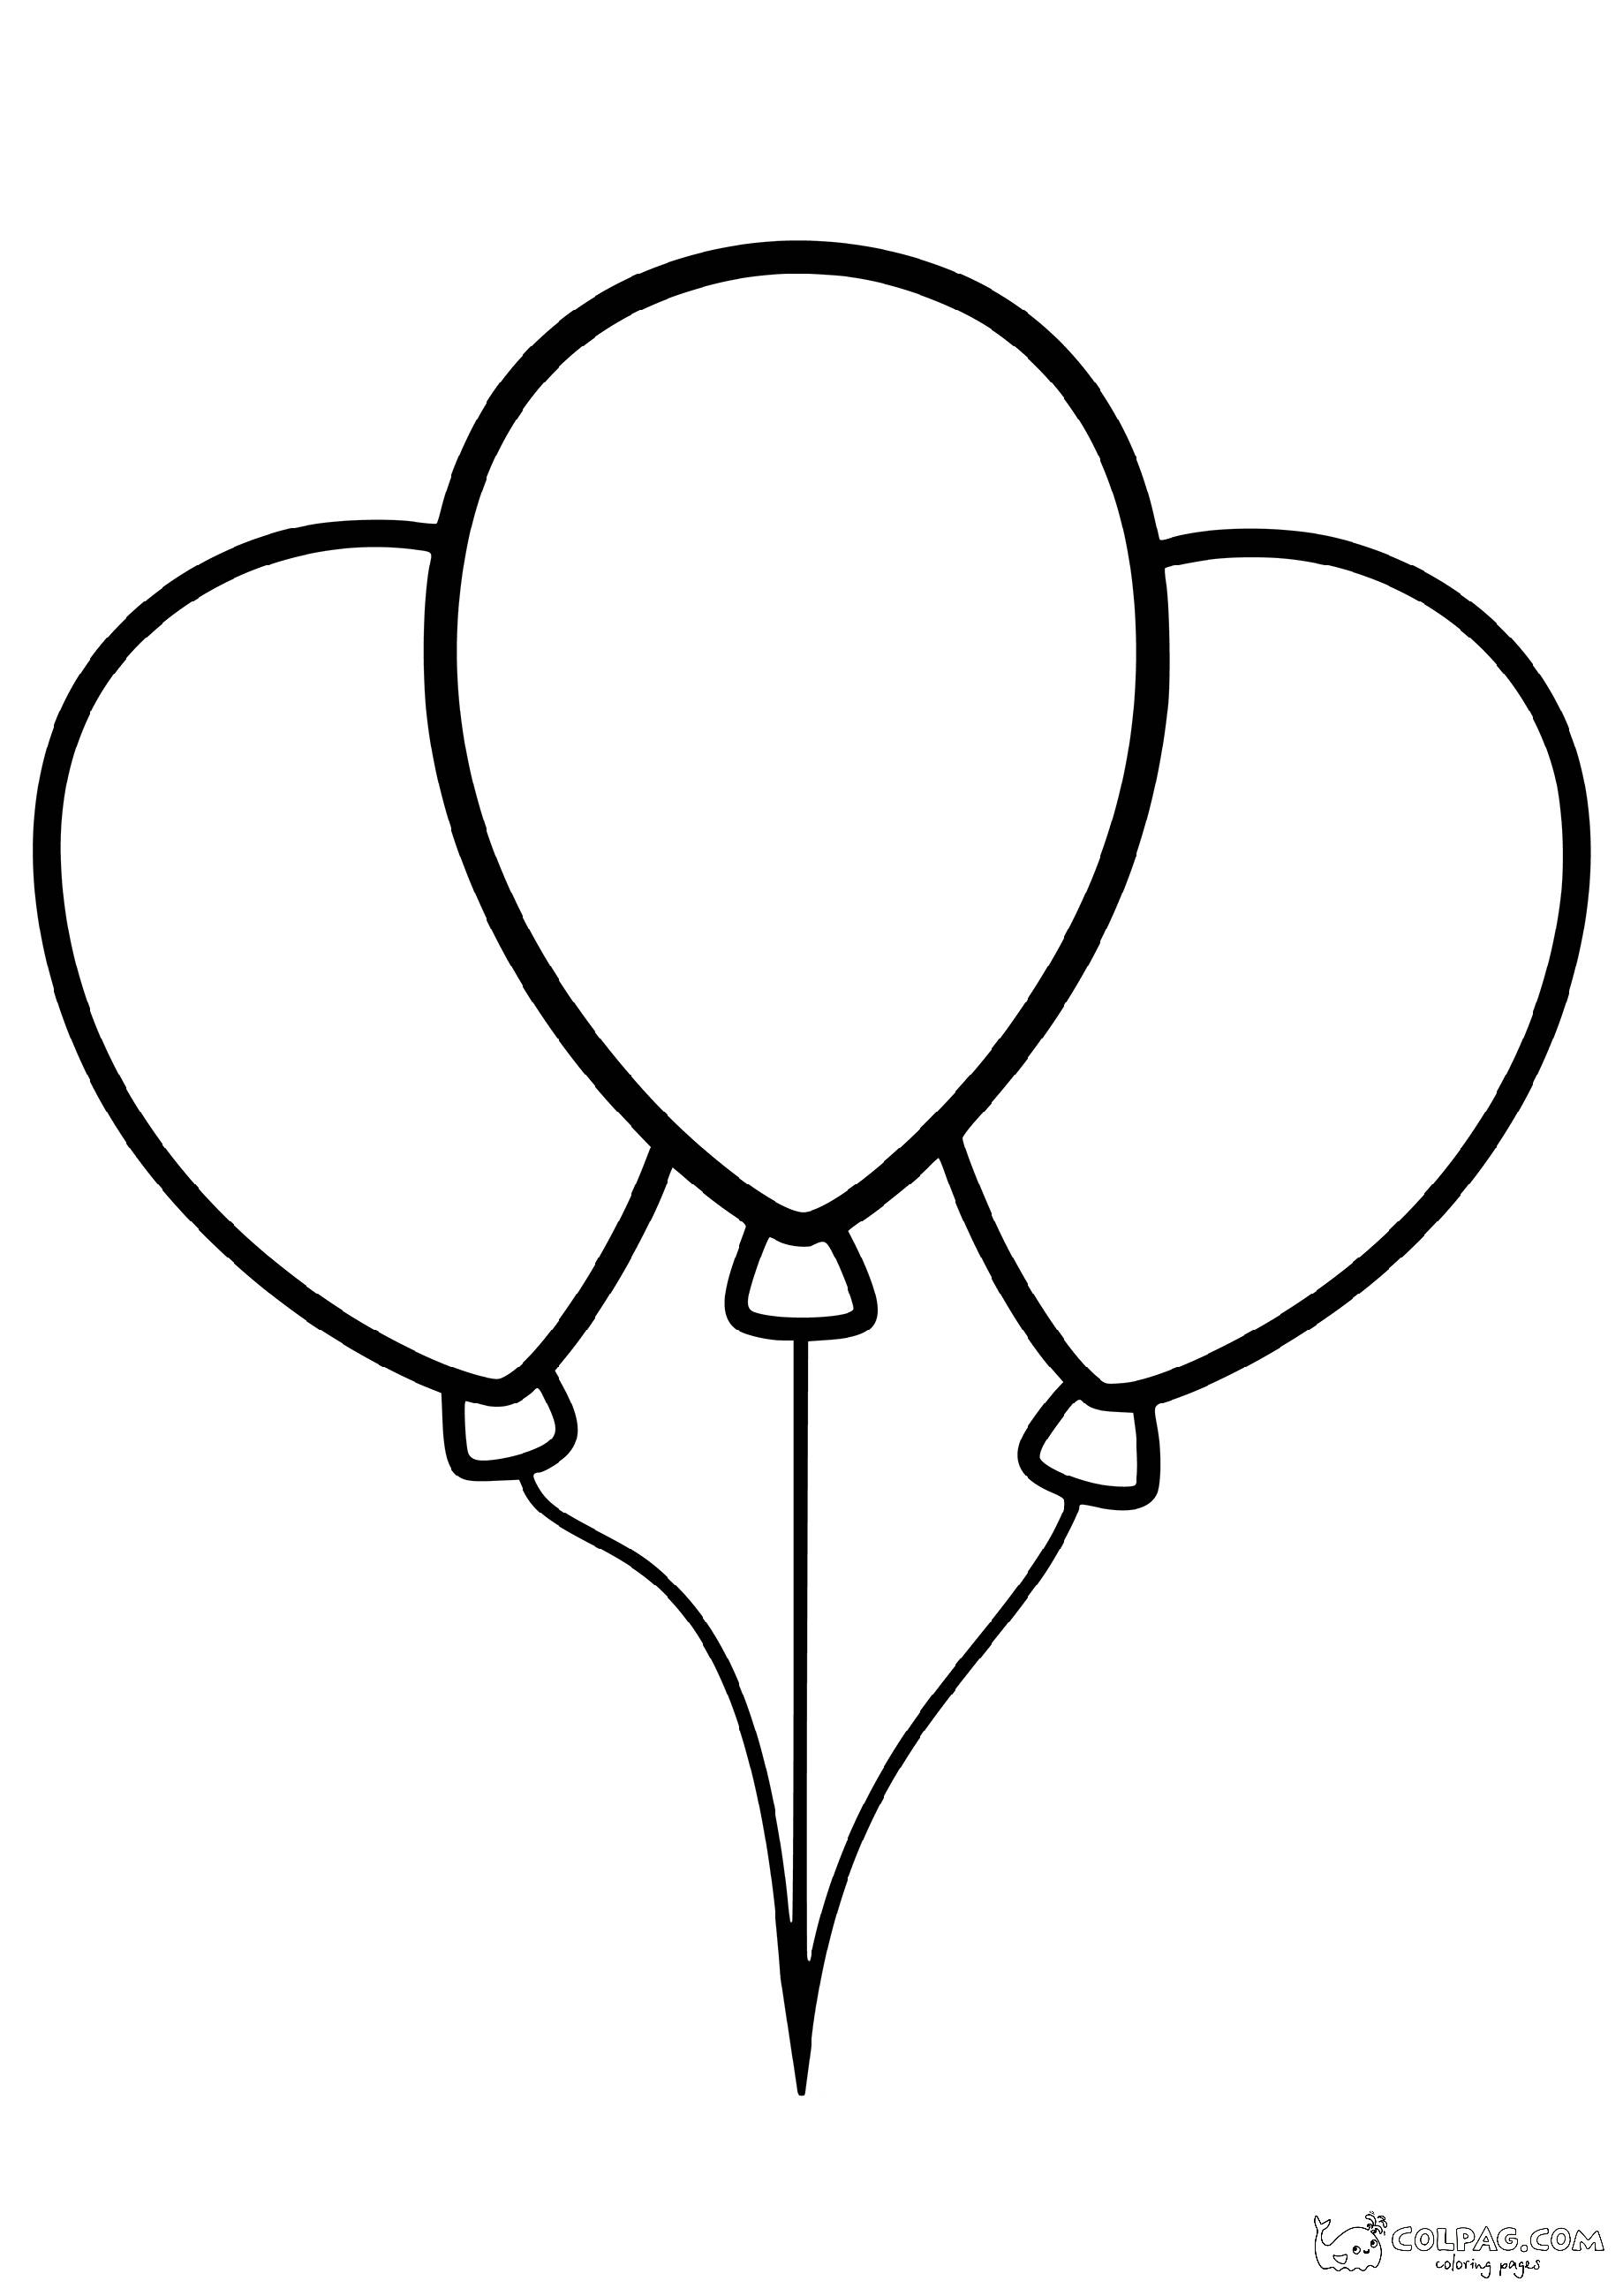 32-three-flying-baloons-coloring-page-colpag-32